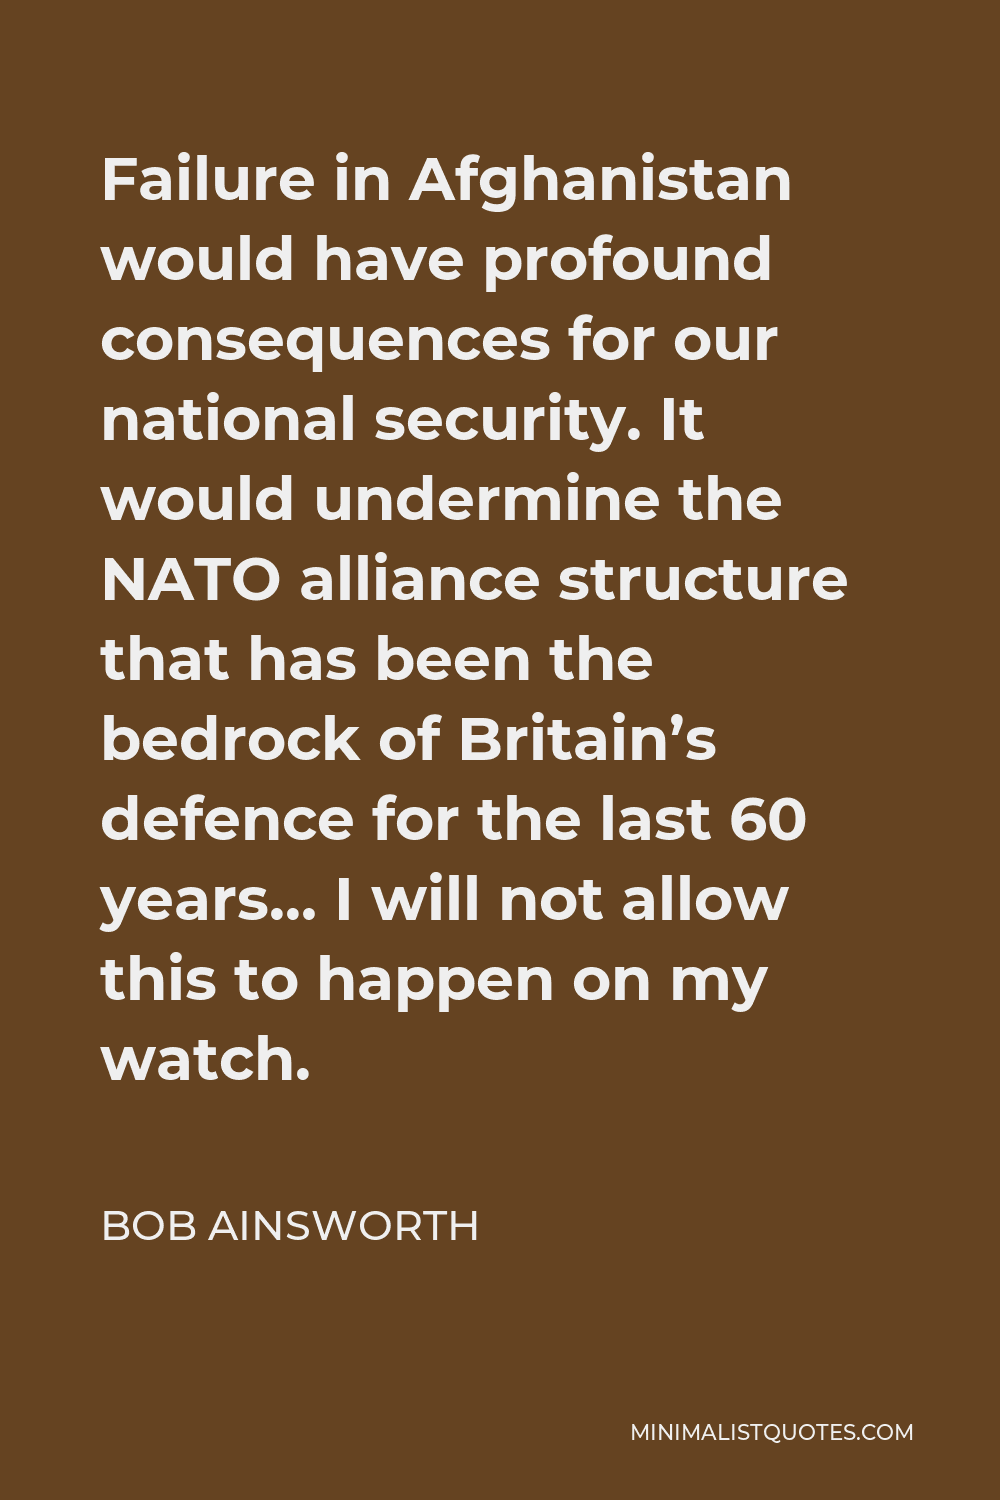 Bob Ainsworth Quote - Failure in Afghanistan would have profound consequences for our national security. It would undermine the NATO alliance structure that has been the bedrock of Britain’s defence for the last 60 years… I will not allow this to happen on my watch.